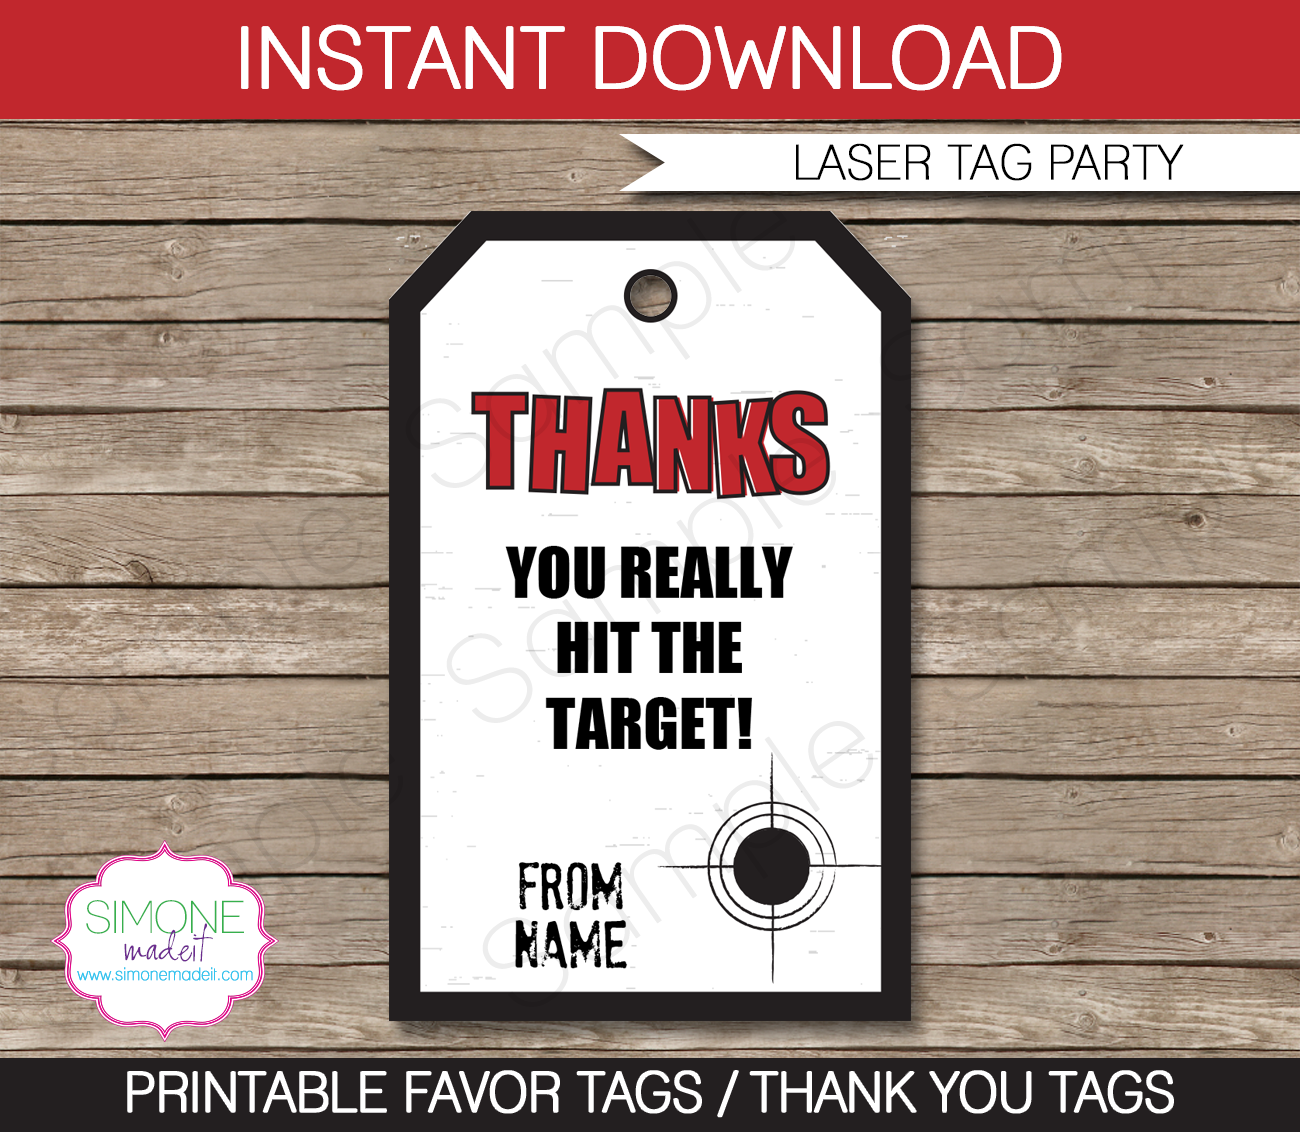 laser-tag-party-favor-tag-templates-thank-you-tags